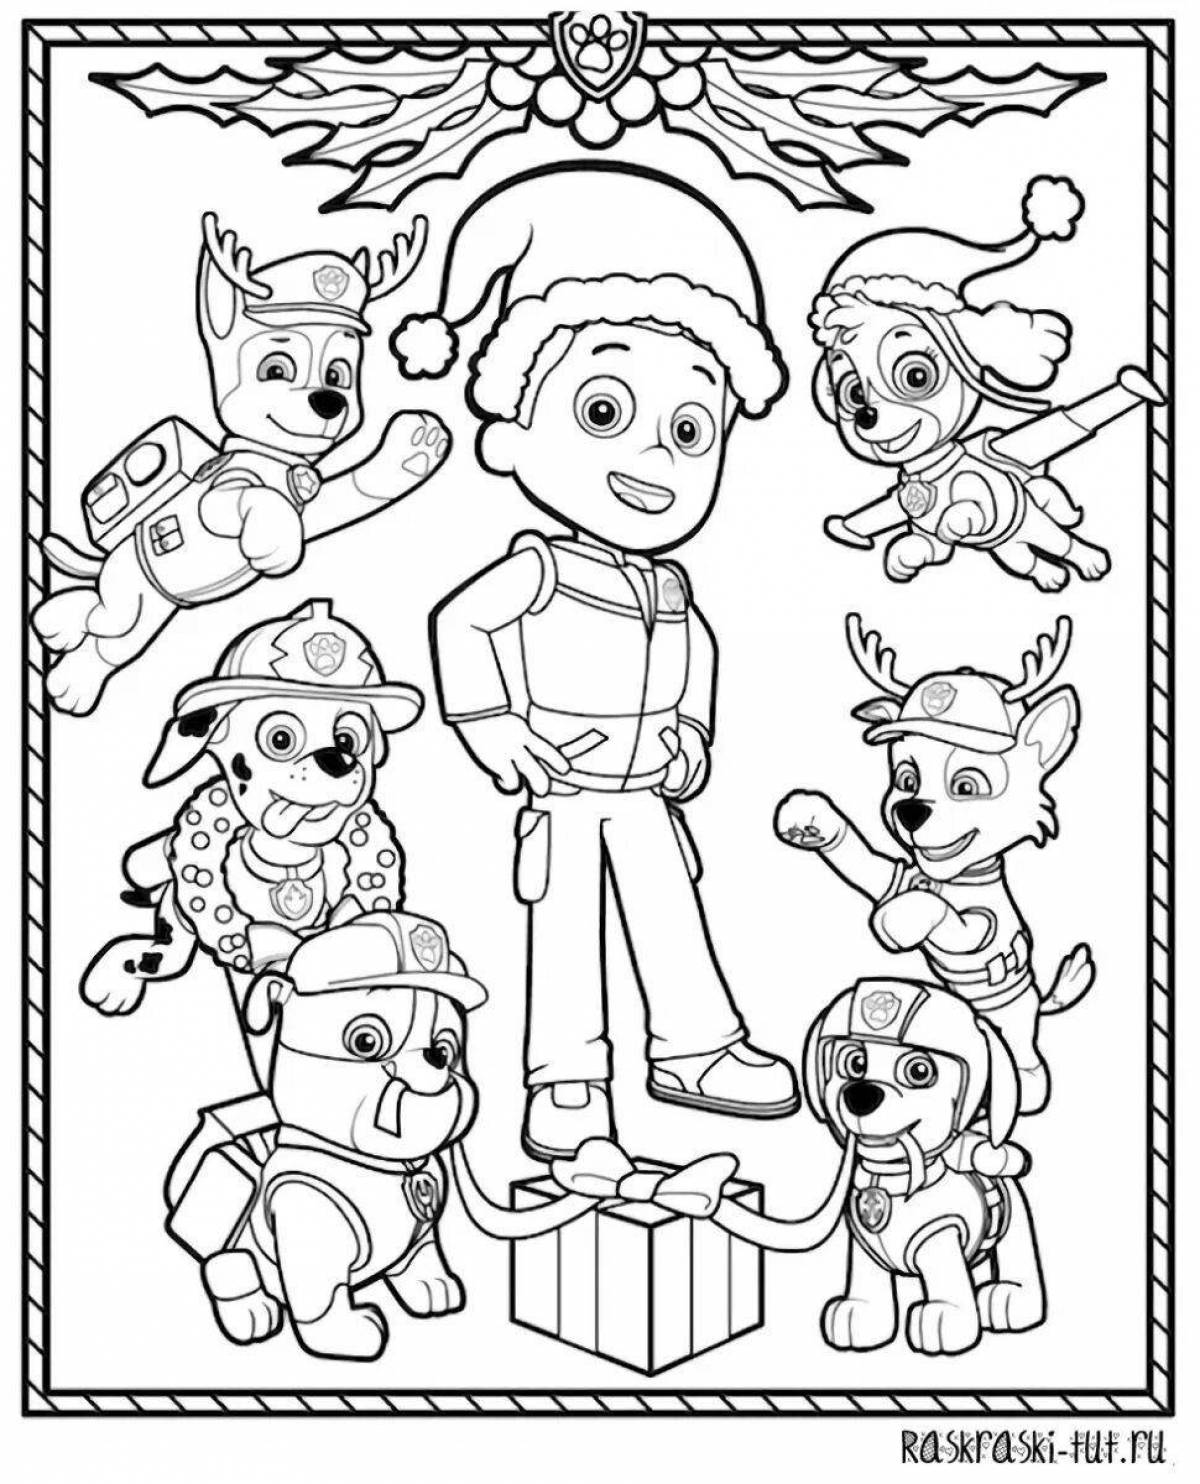 Cute paw patrol coloring book all characters